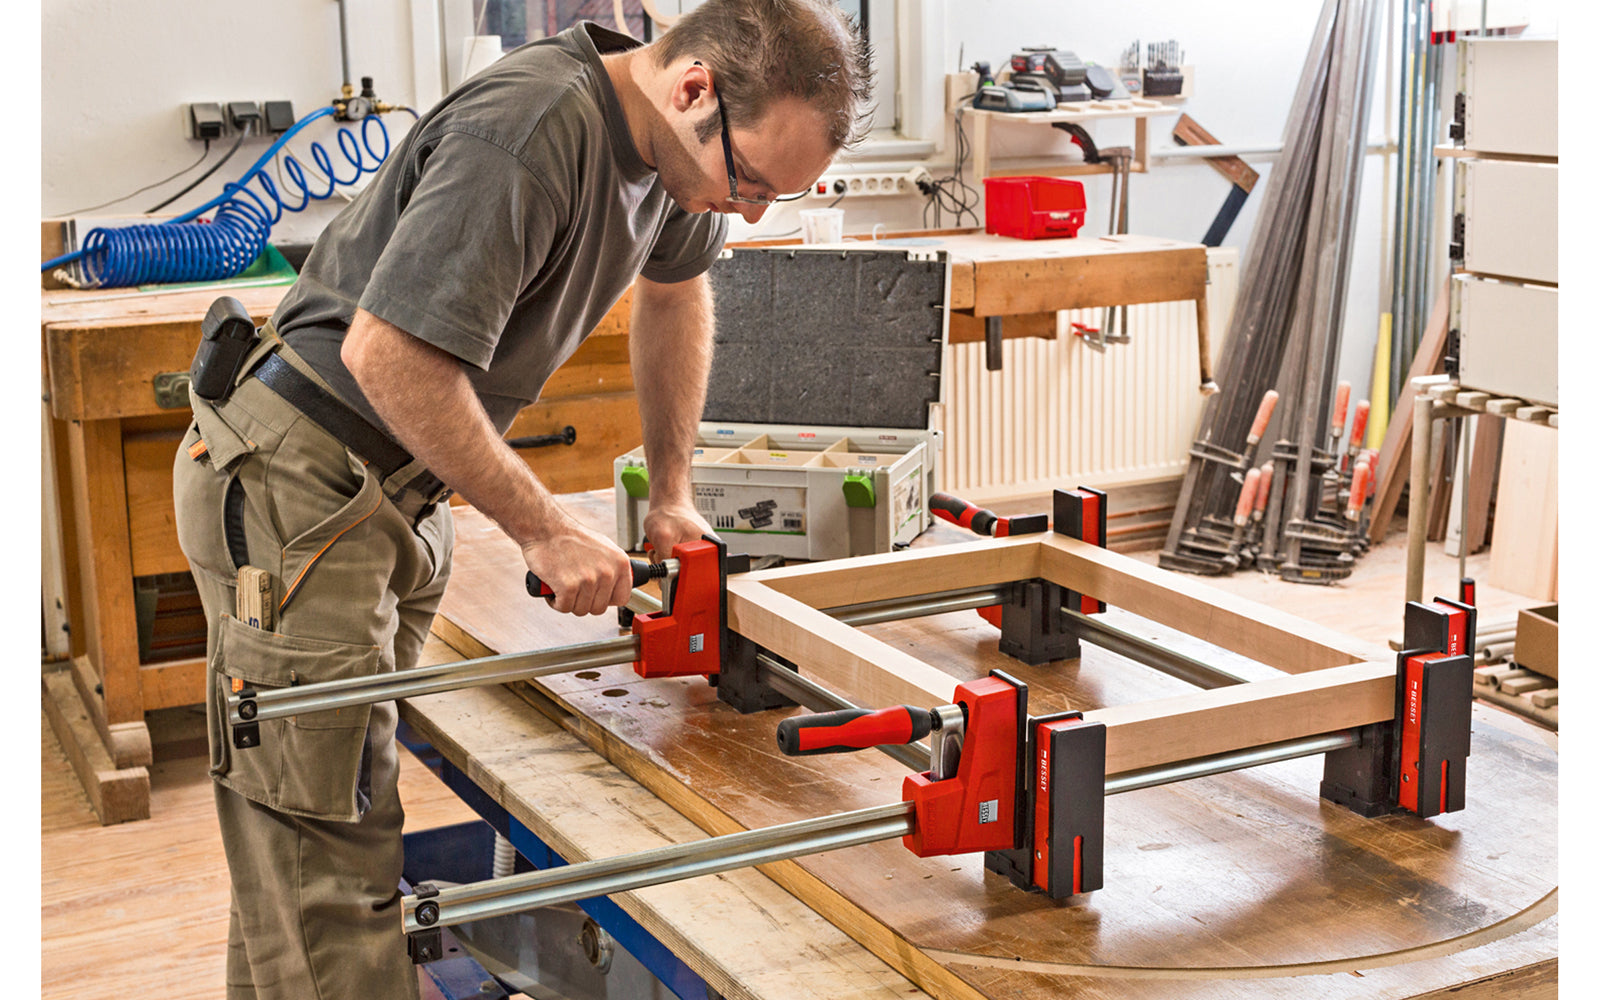 Bessey Parallel K-Body Bar Clamps are powerful clamps designed to clamp at 90 degrees to the rail with very large clamping surfaces. Converts to spreading with no tools required in seconds by removing end stop & reversing the operating head. 12" max opening - 3-3/4" throat depth - Model KRE3512 - Anti-slide mechanism  -  788502203739